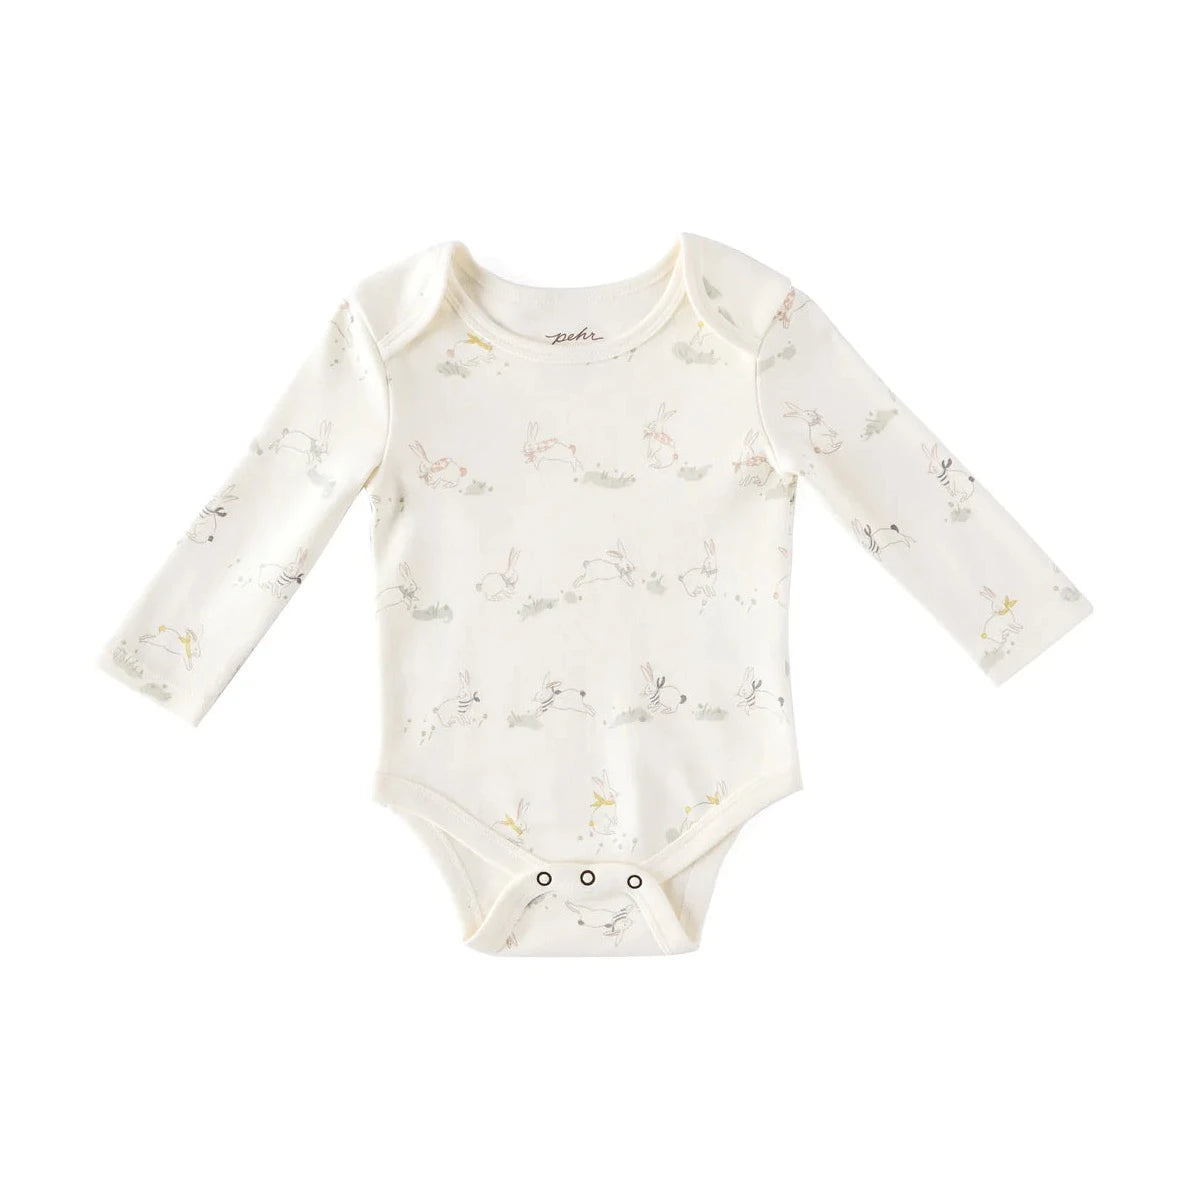 long sleeve one piece with bunnies printed all over it